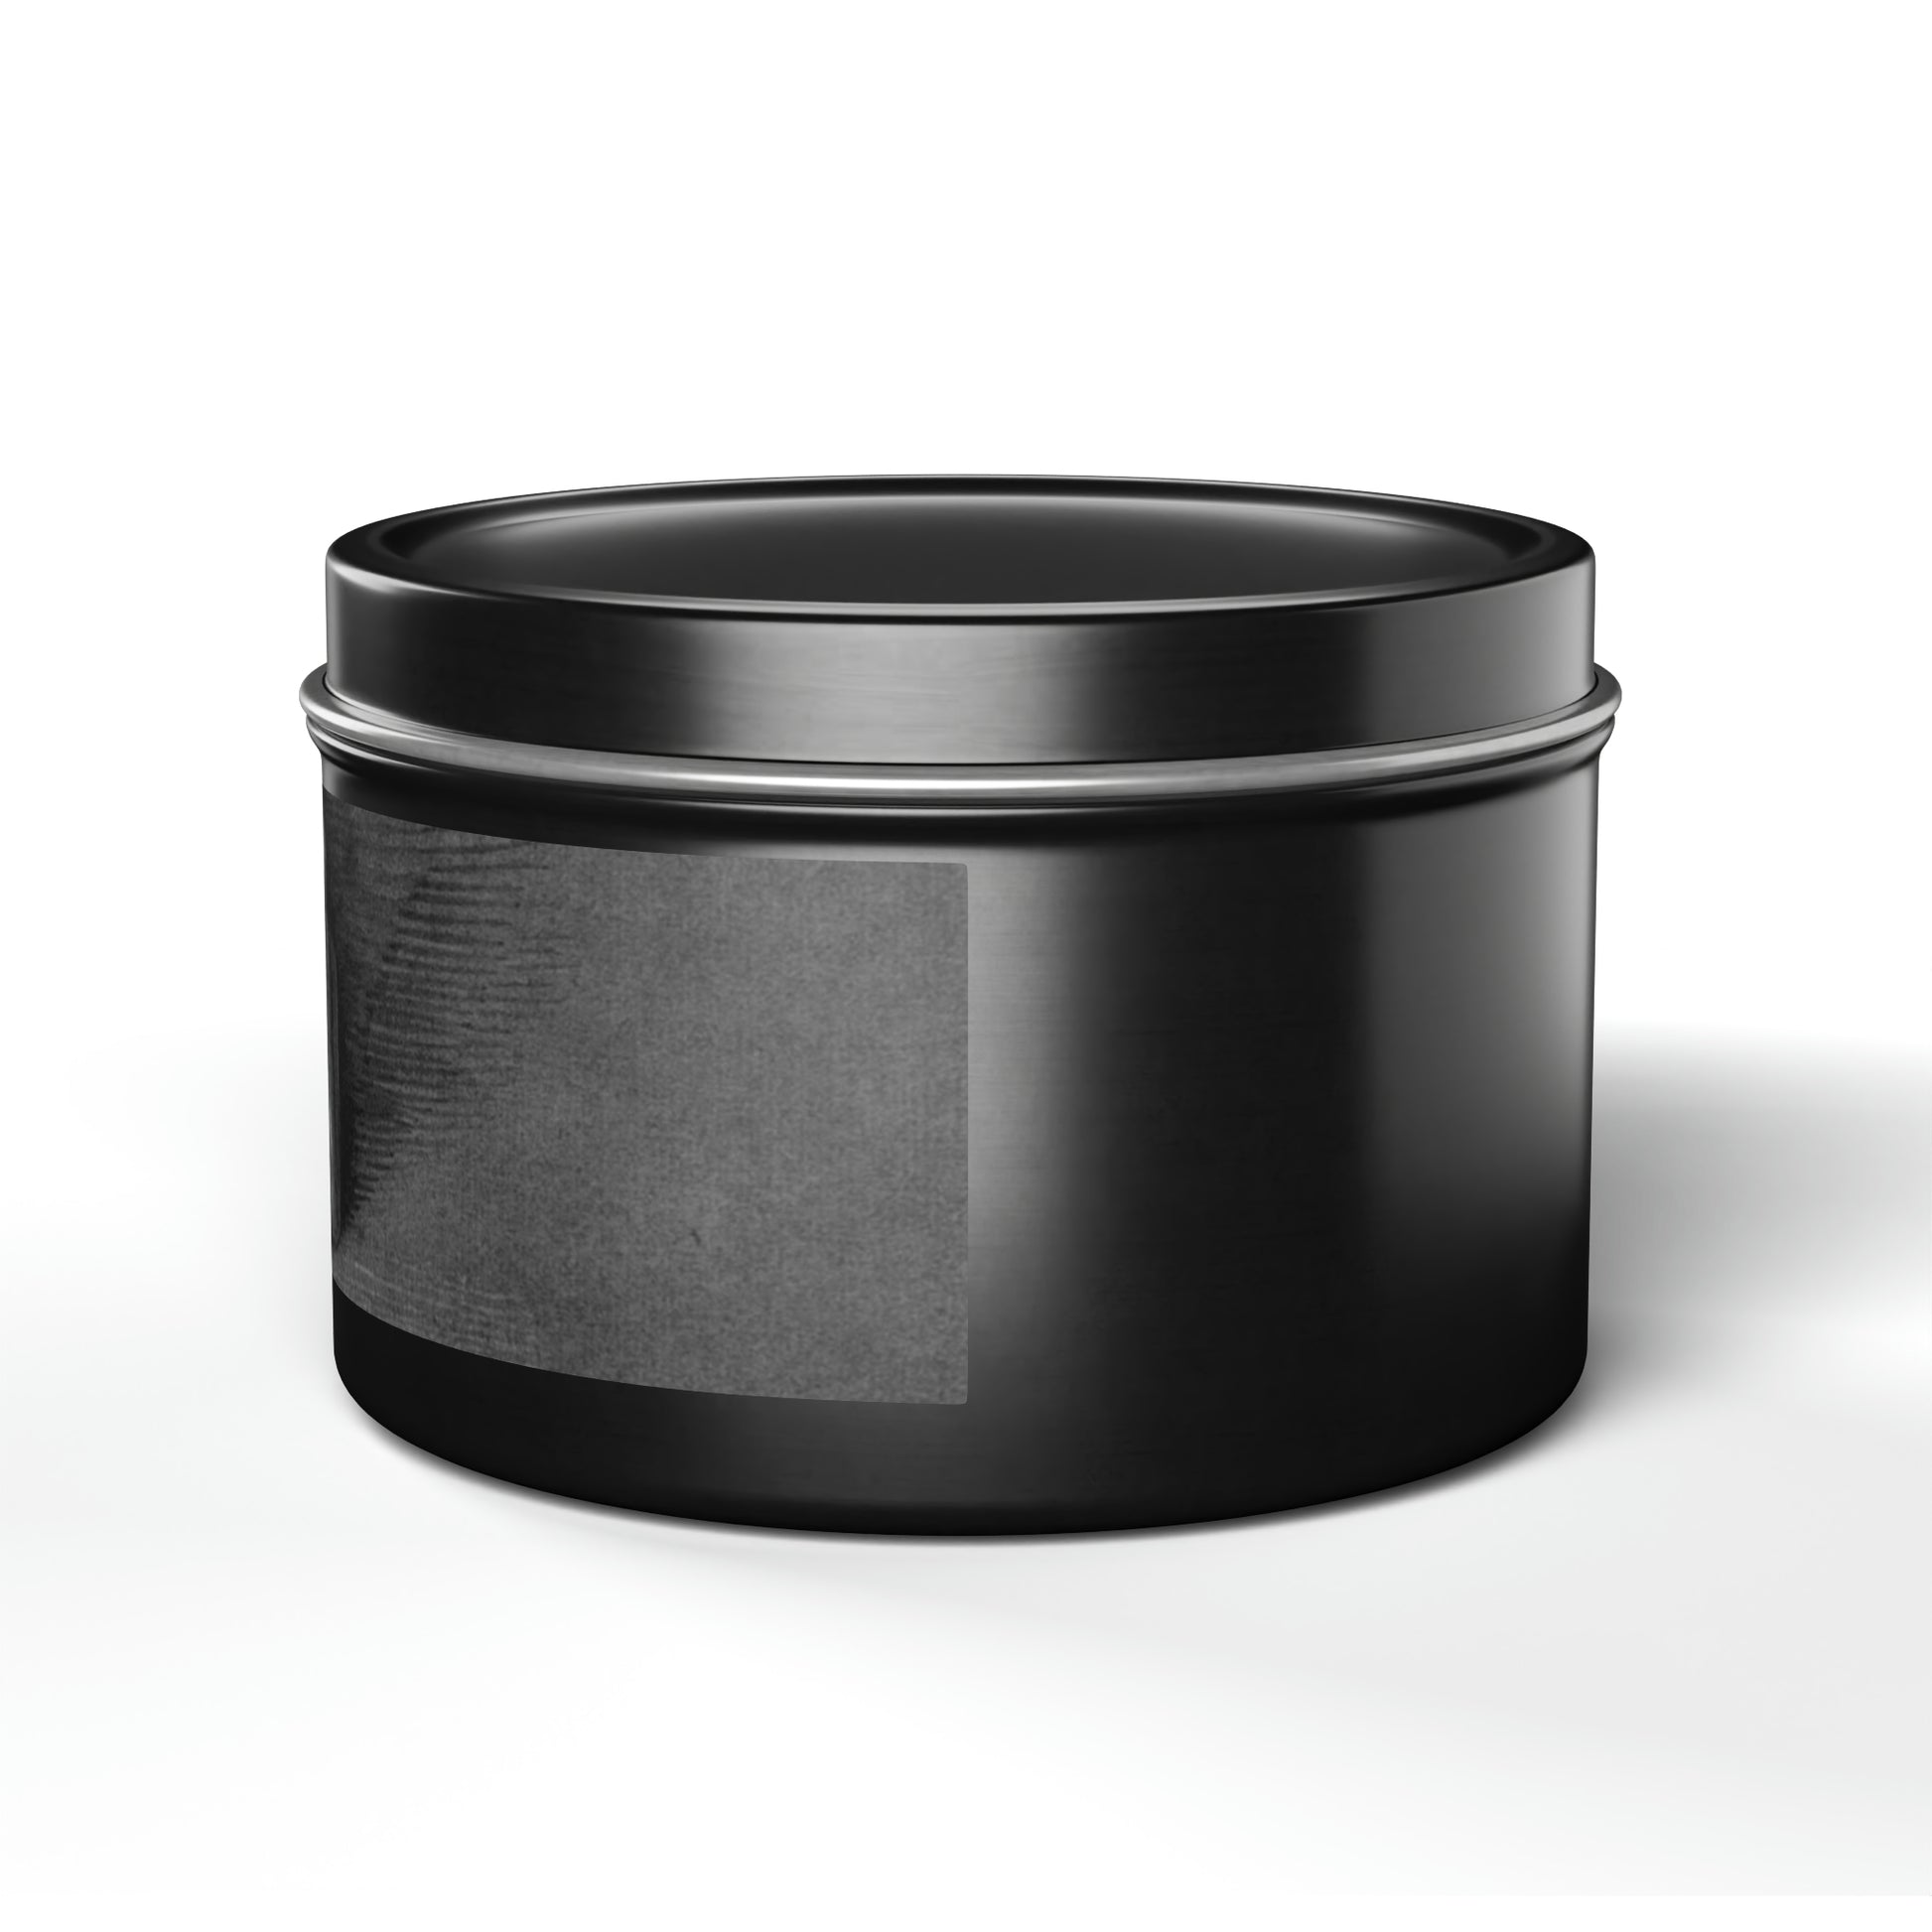 a black container is sitting on a white surface